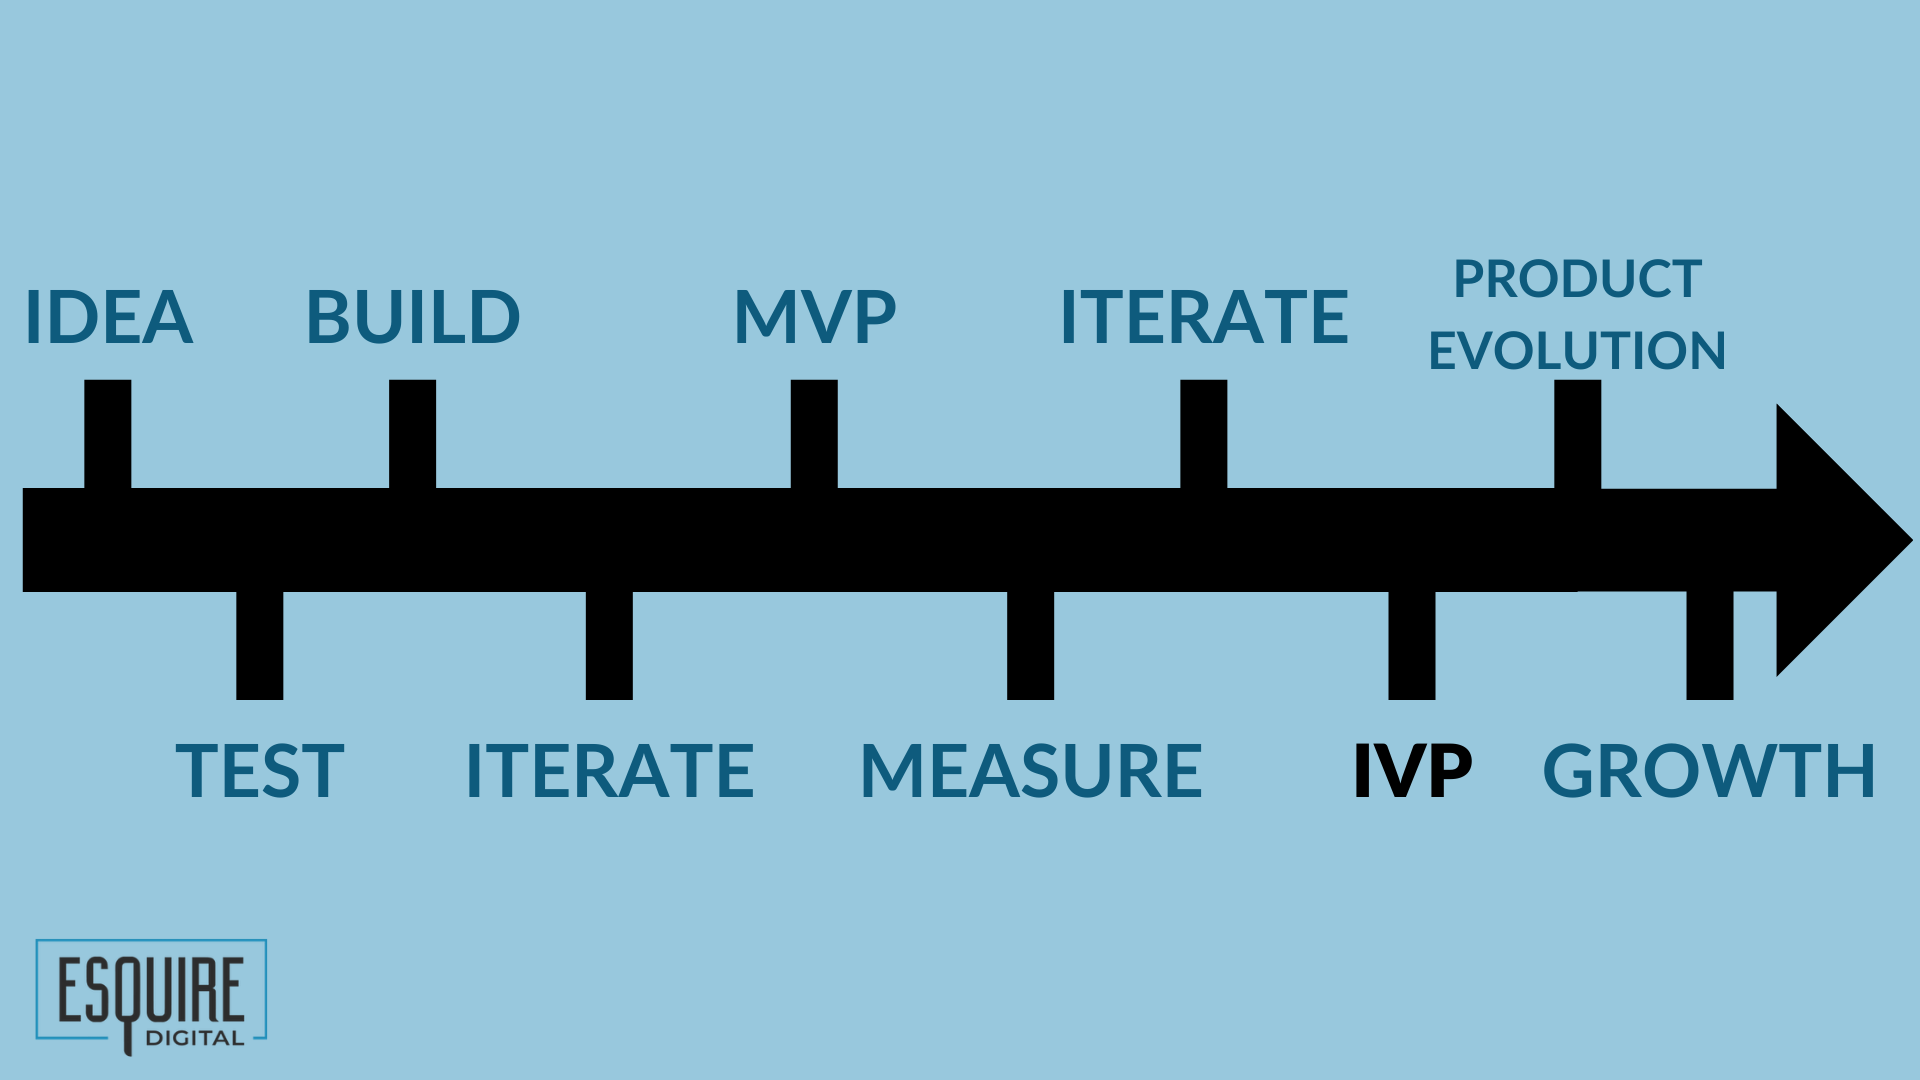 The IVP falls a while after the MVP on the idea-to-final product continuum